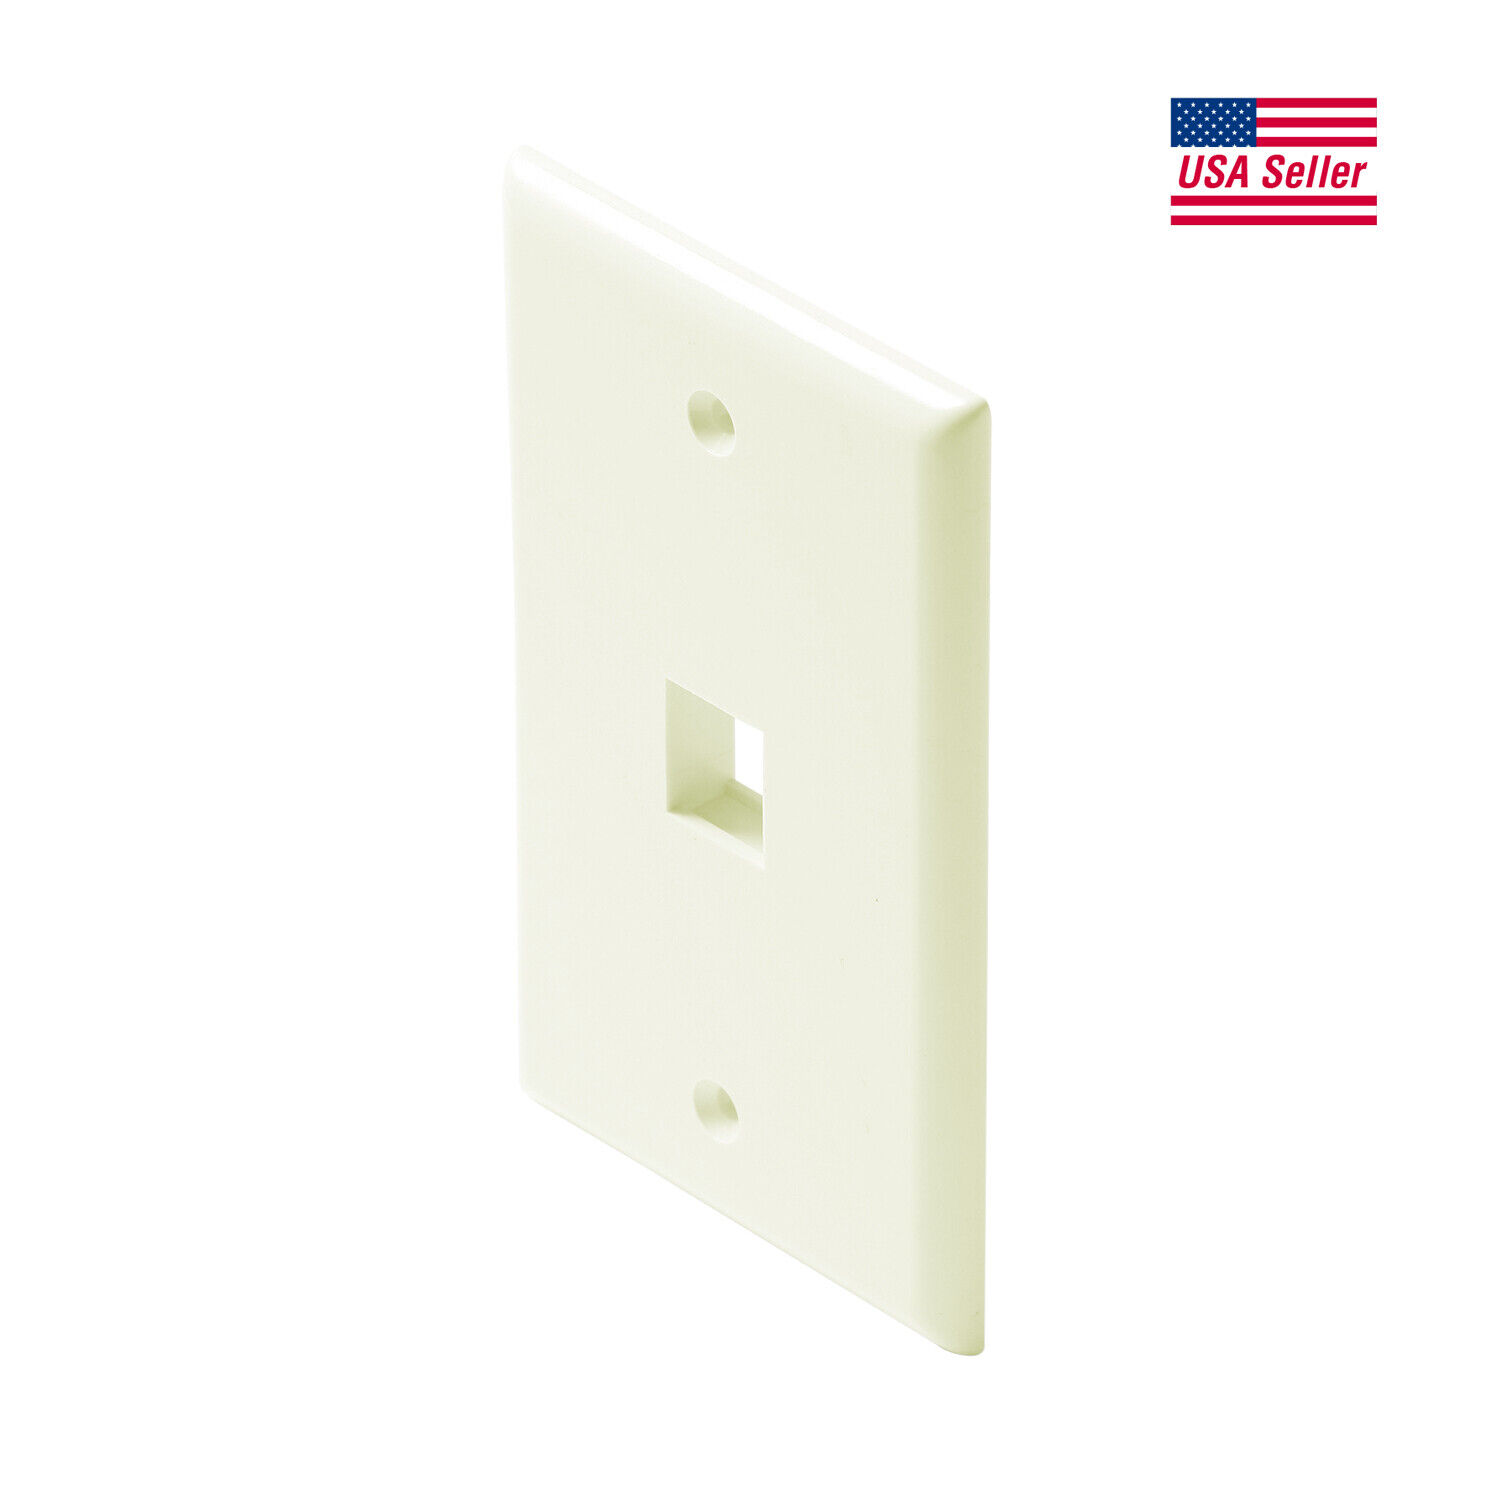 Steren Keystone Wall Plate for Cat5e, Cat6 - 1 2 3 4 or 6 ports - Light Almond